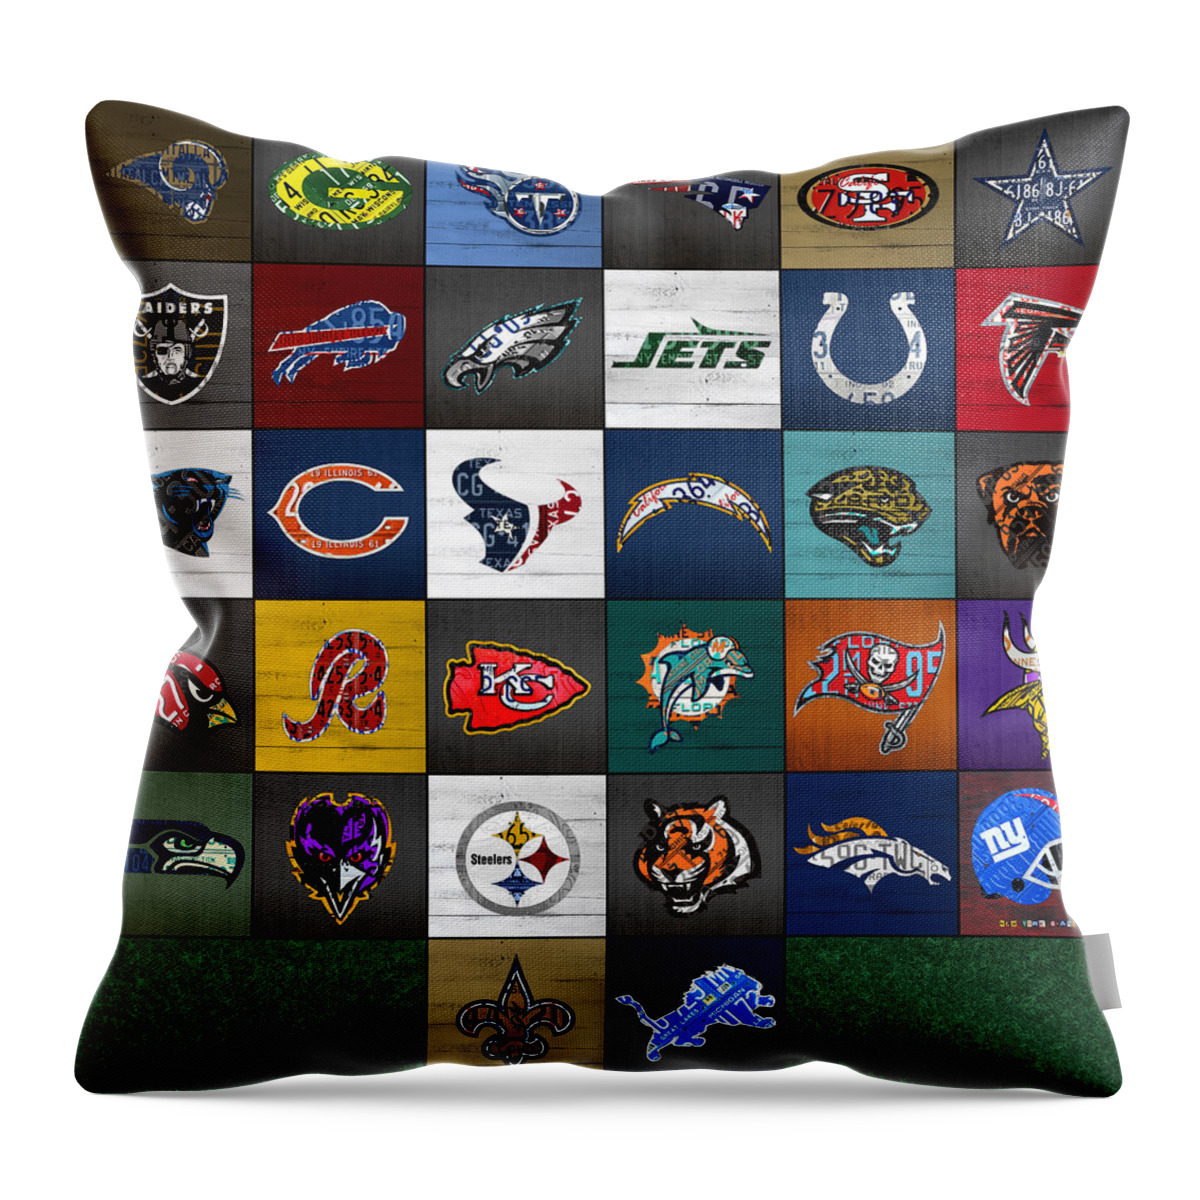 Hit Throw Pillow featuring the mixed media Hit the Gridiron Football League Retro Team Logos Recycled Vintage License Plate Art by Design Turnpike